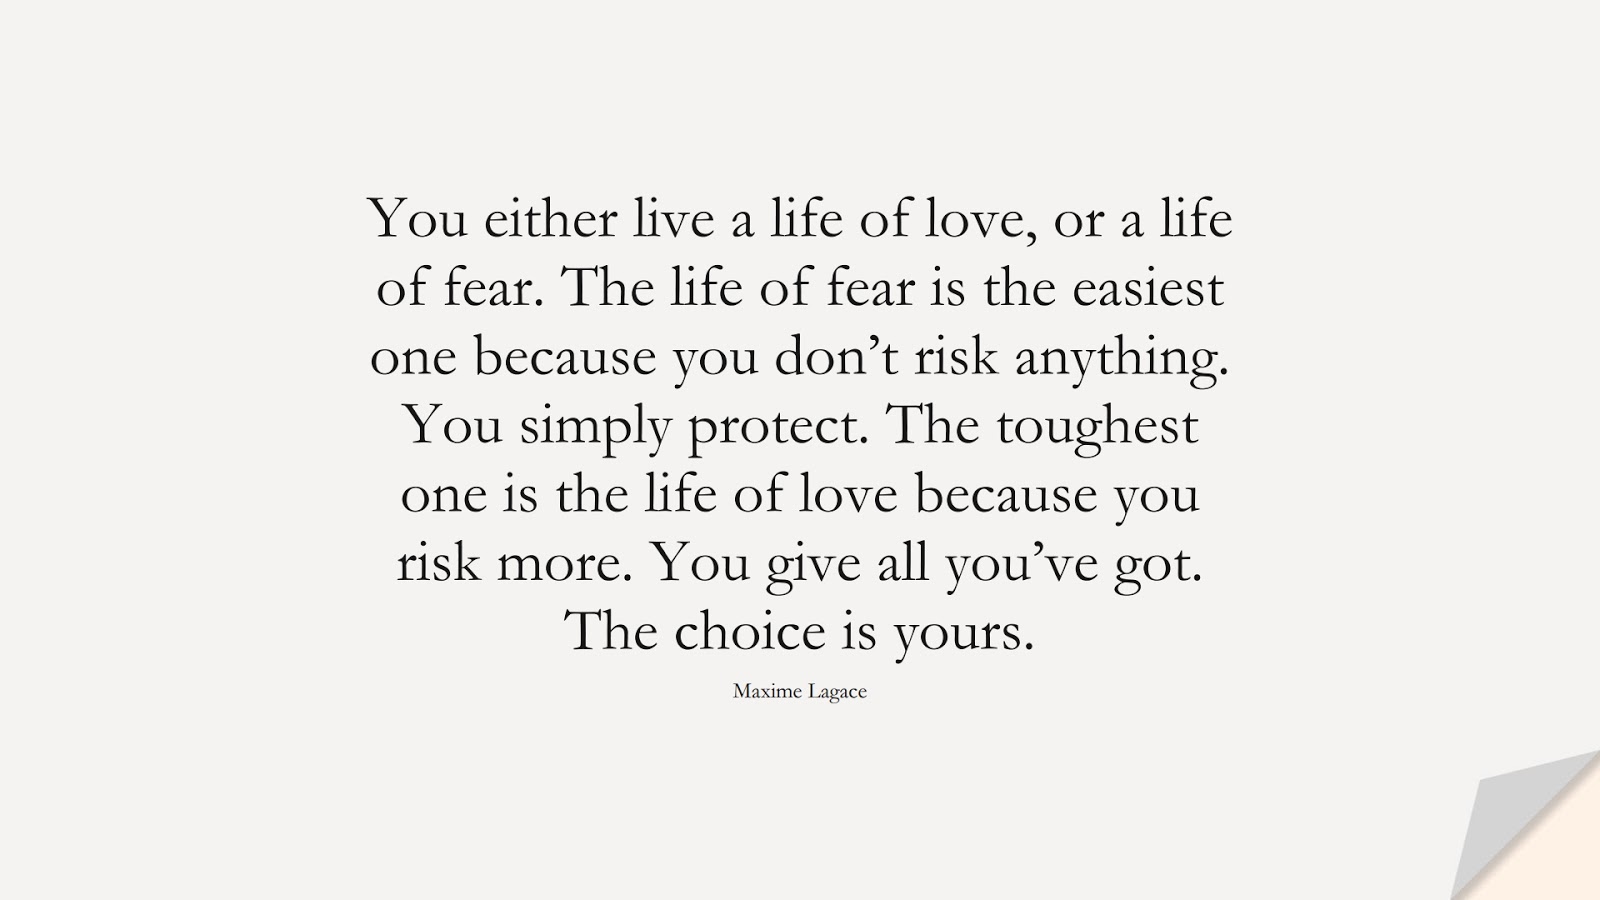 You either live a life of love, or a life of fear. The life of fear is the easiest one because you don’t risk anything. You simply protect. The toughest one is the life of love because you risk more. You give all you’ve got. The choice is yours. (Maxime Lagace);  #LifeQuotes